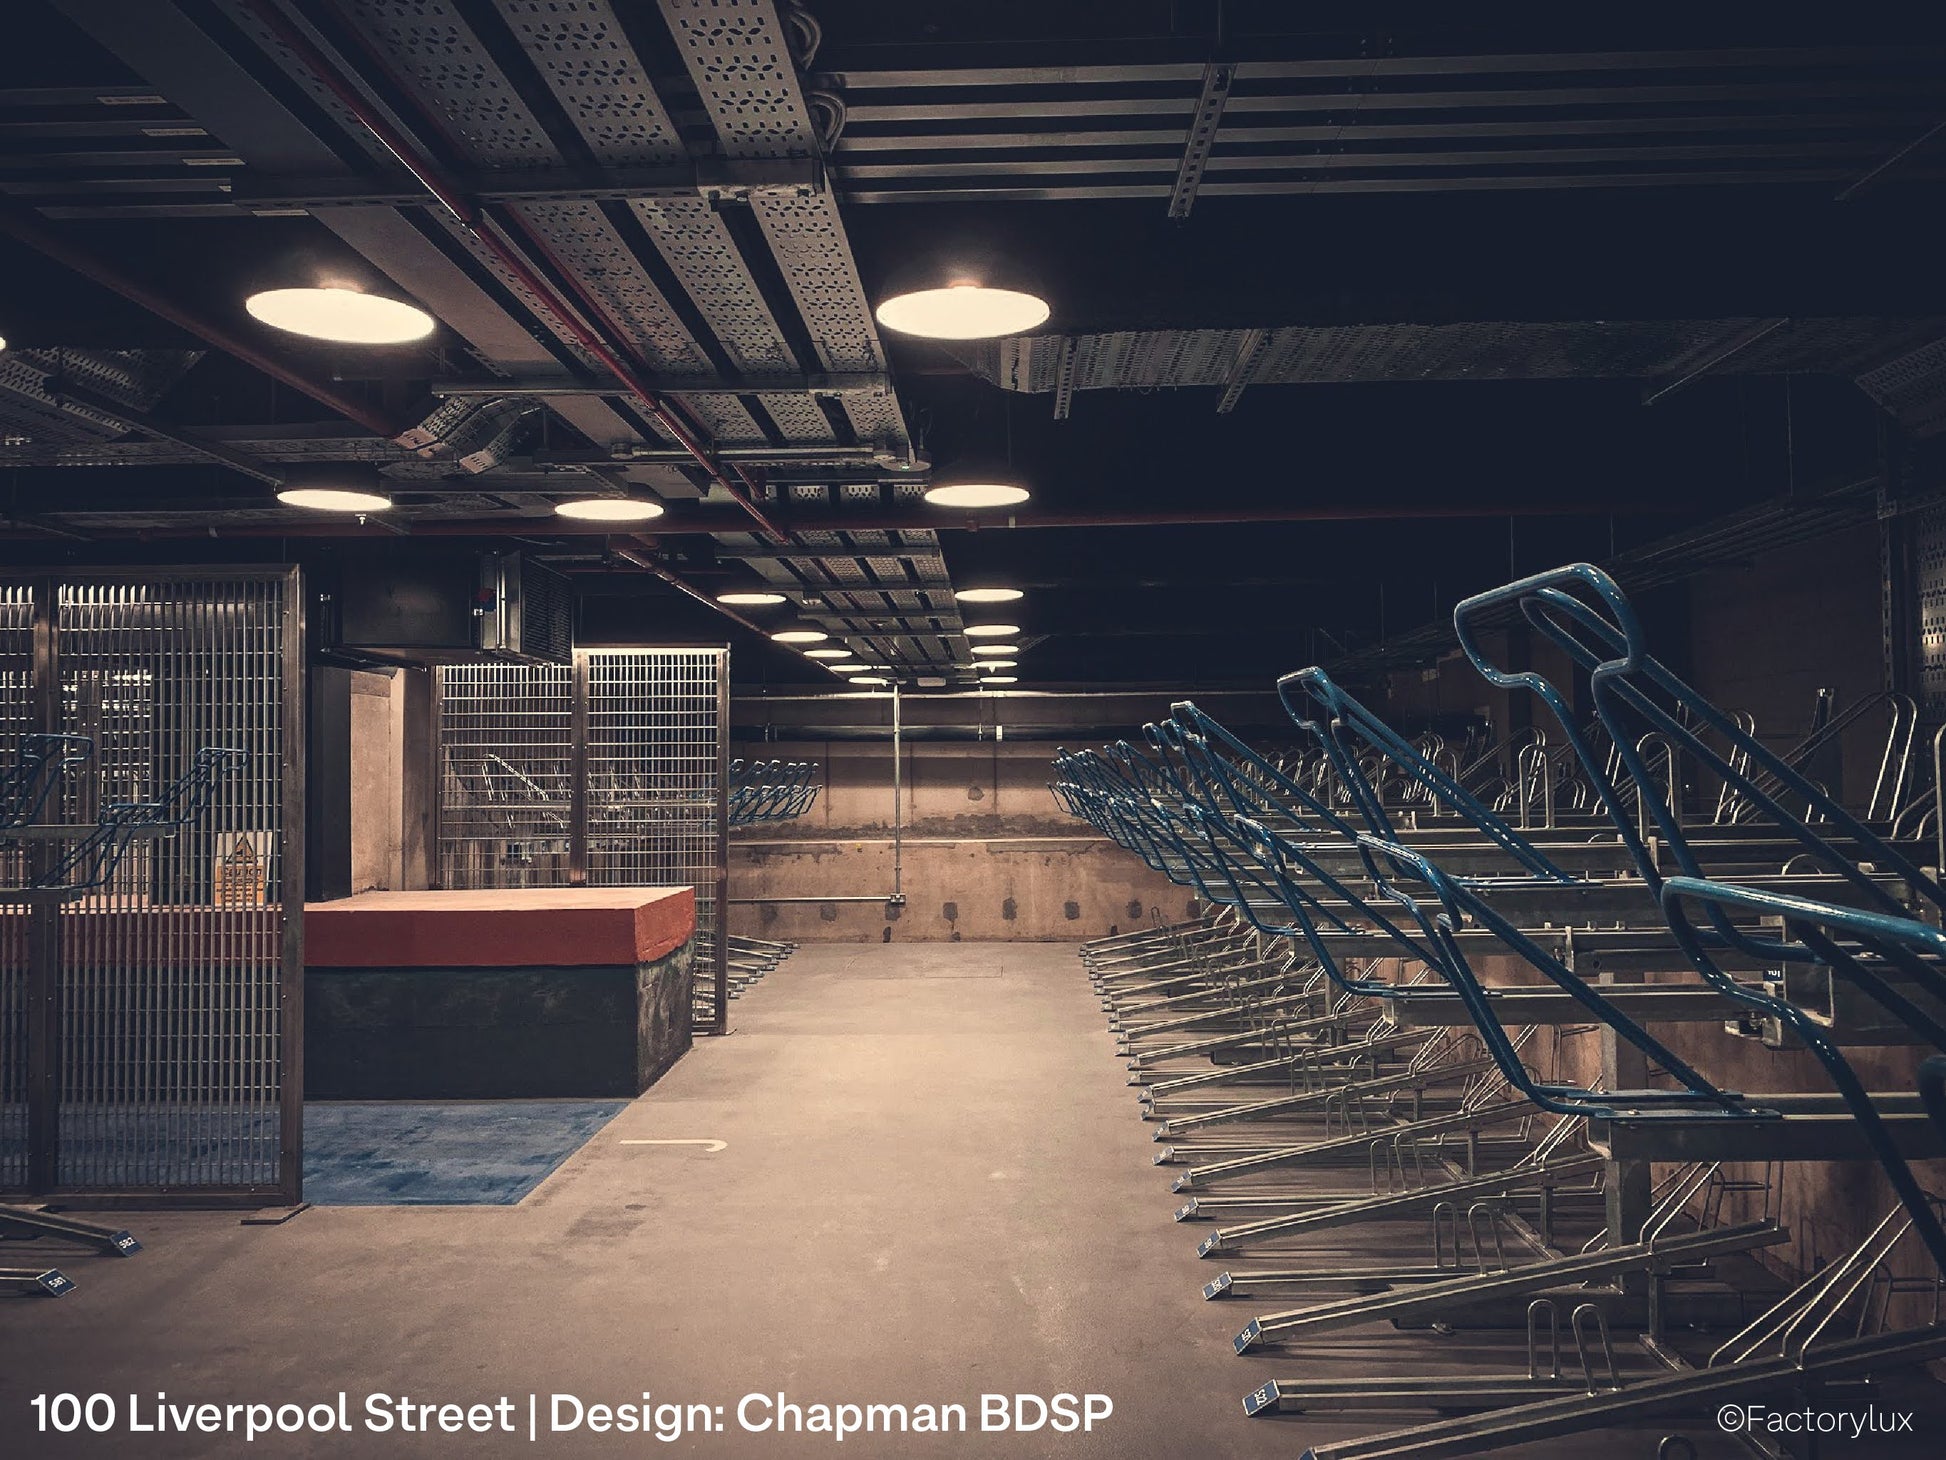 Safe bicycle storage with attractive pendant lighting in the underground concrete parking lot of an office development